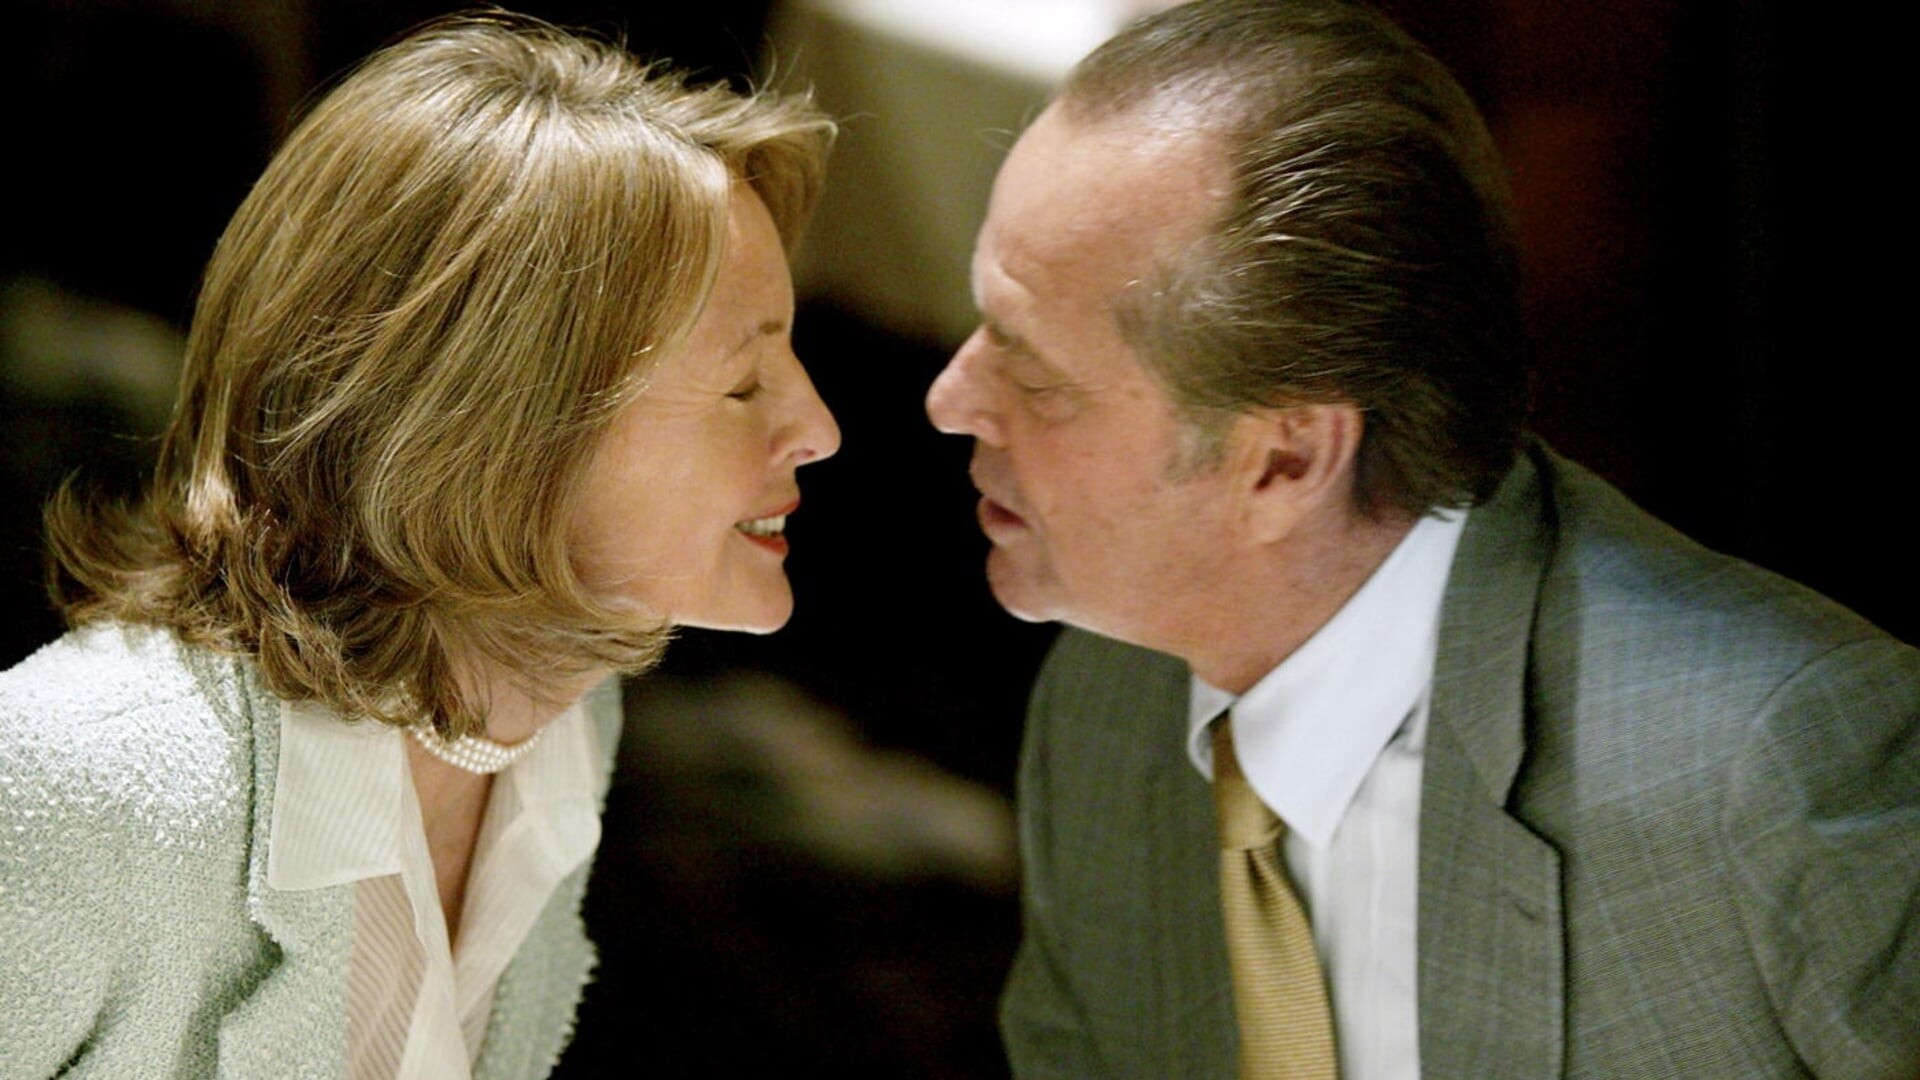 Something's Gotta Give (Movie): Harry and Erica, A successful 60-something and 50-something, Jack Nicholson, Diane Keaton. 1920x1080 Full HD Background.